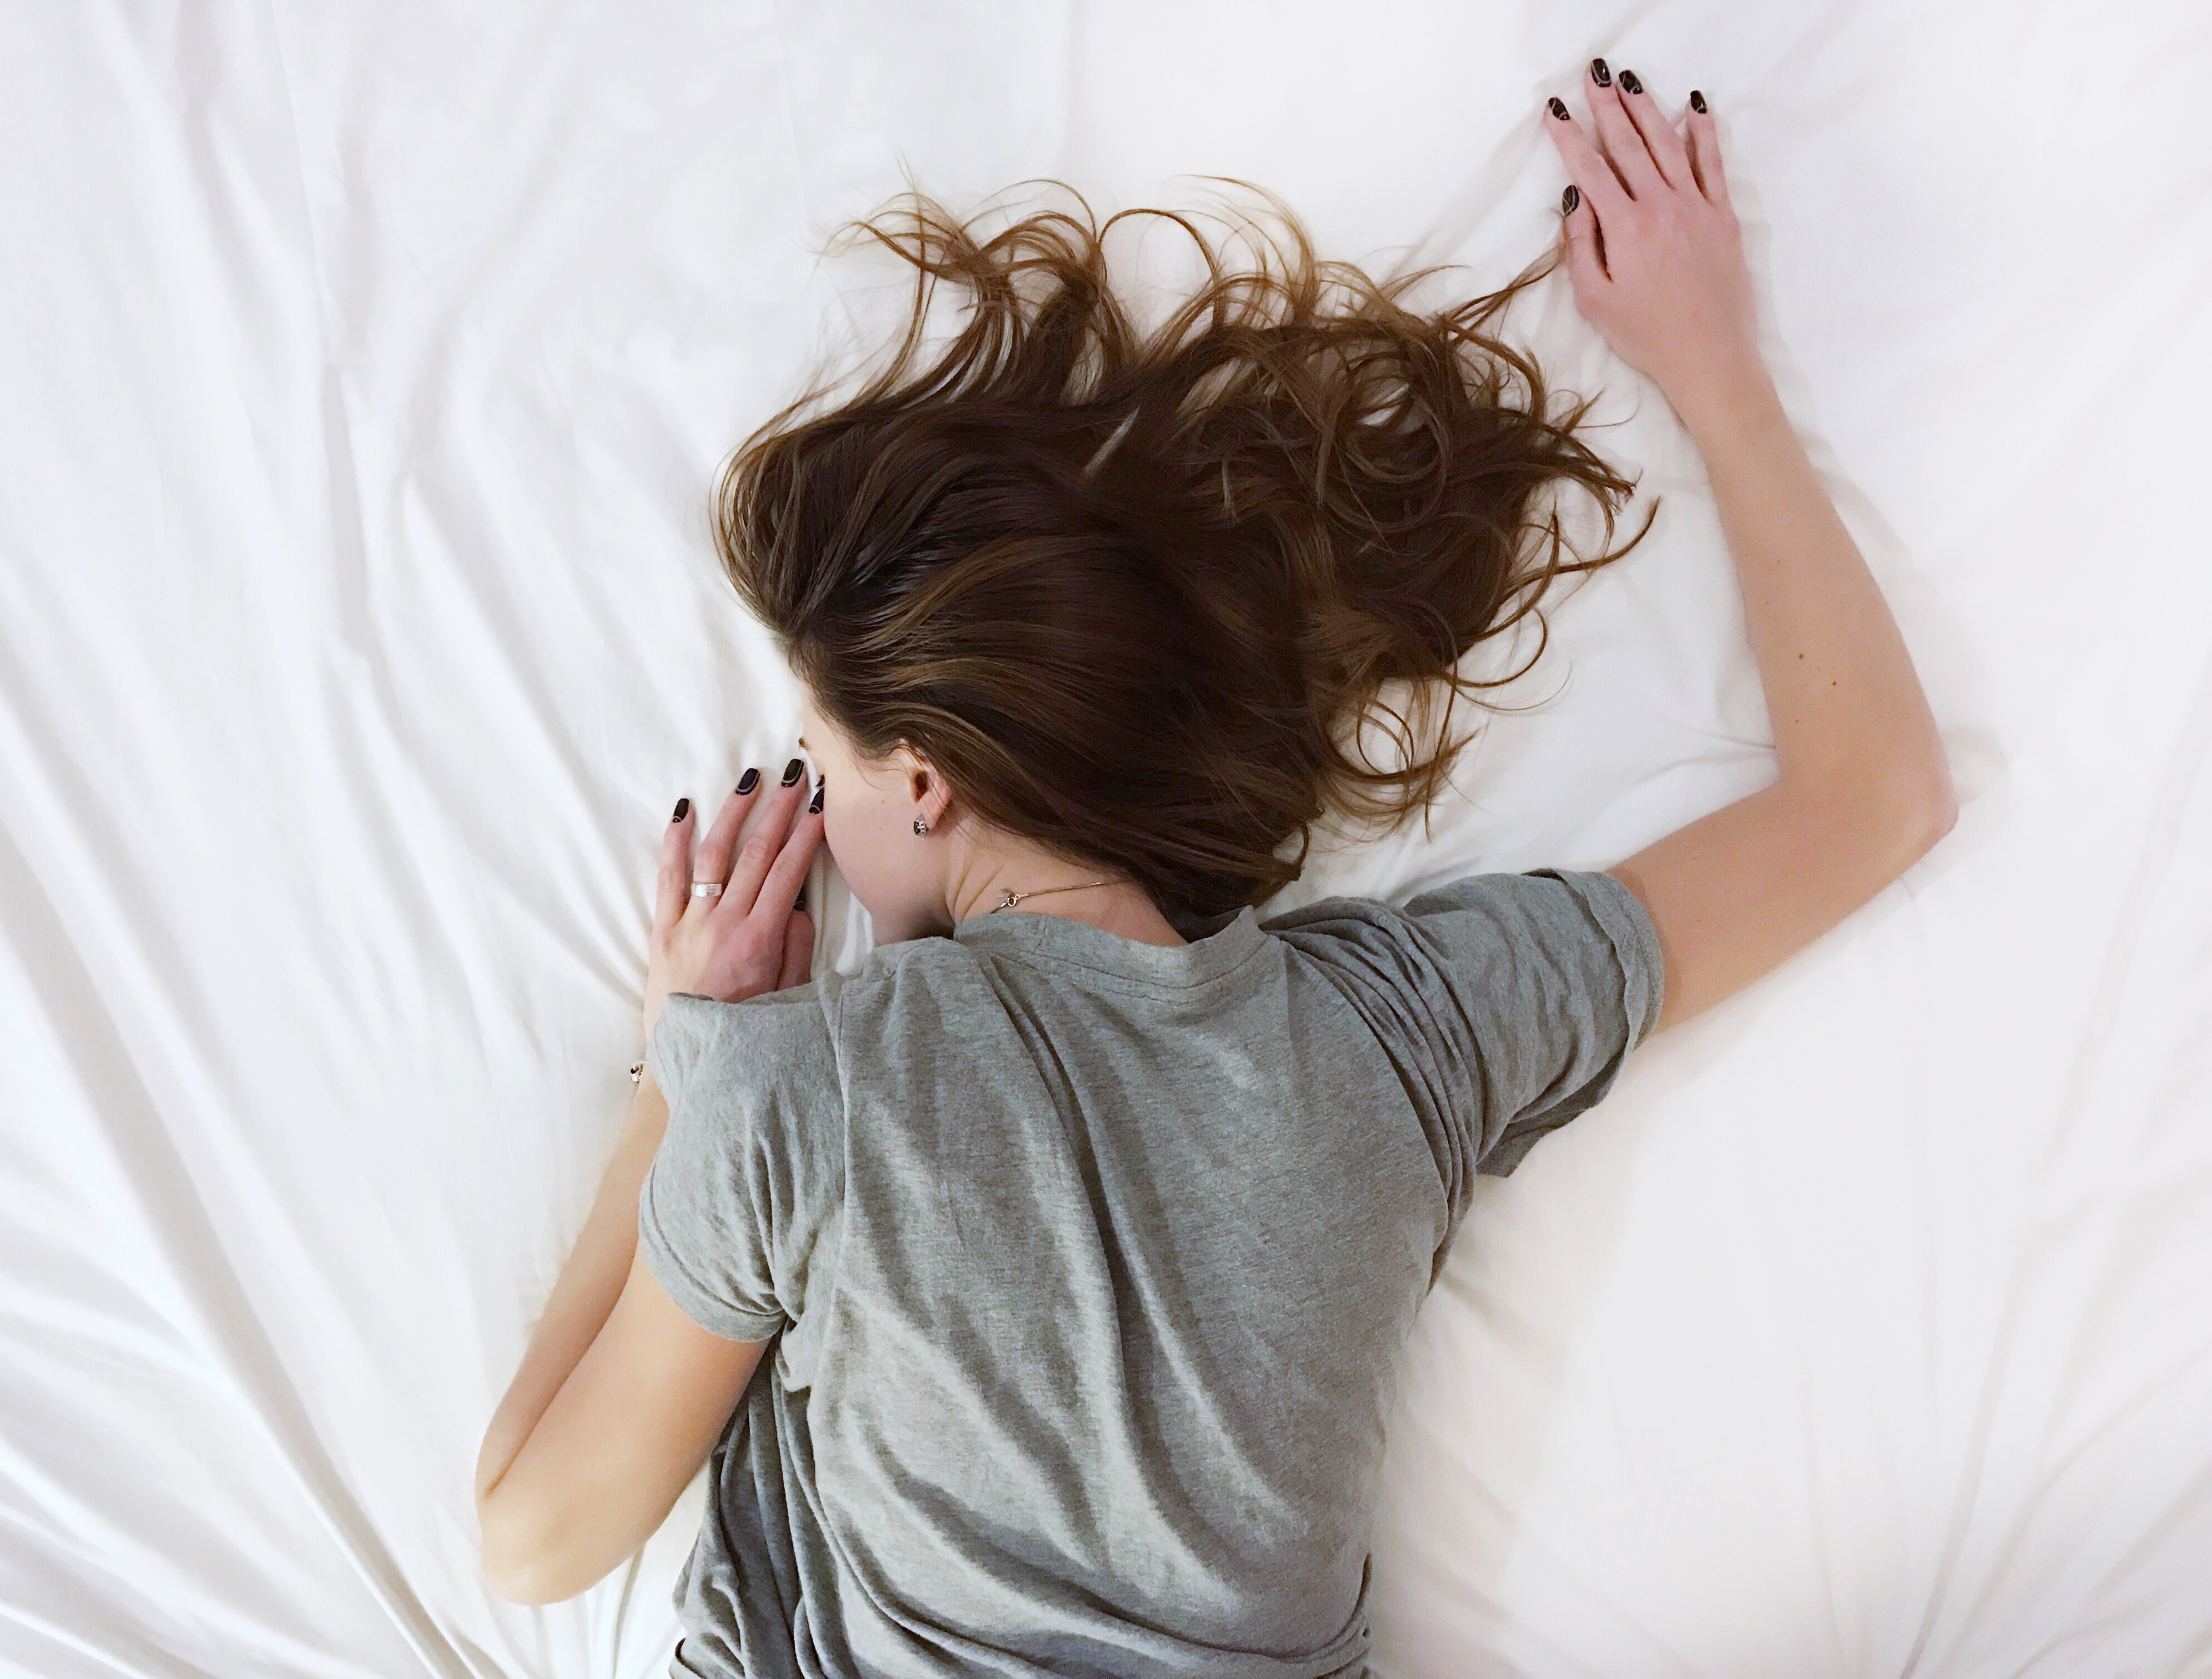 Have you ever experience a sudden jerk of the arms, legs or entire body that wakes you up?